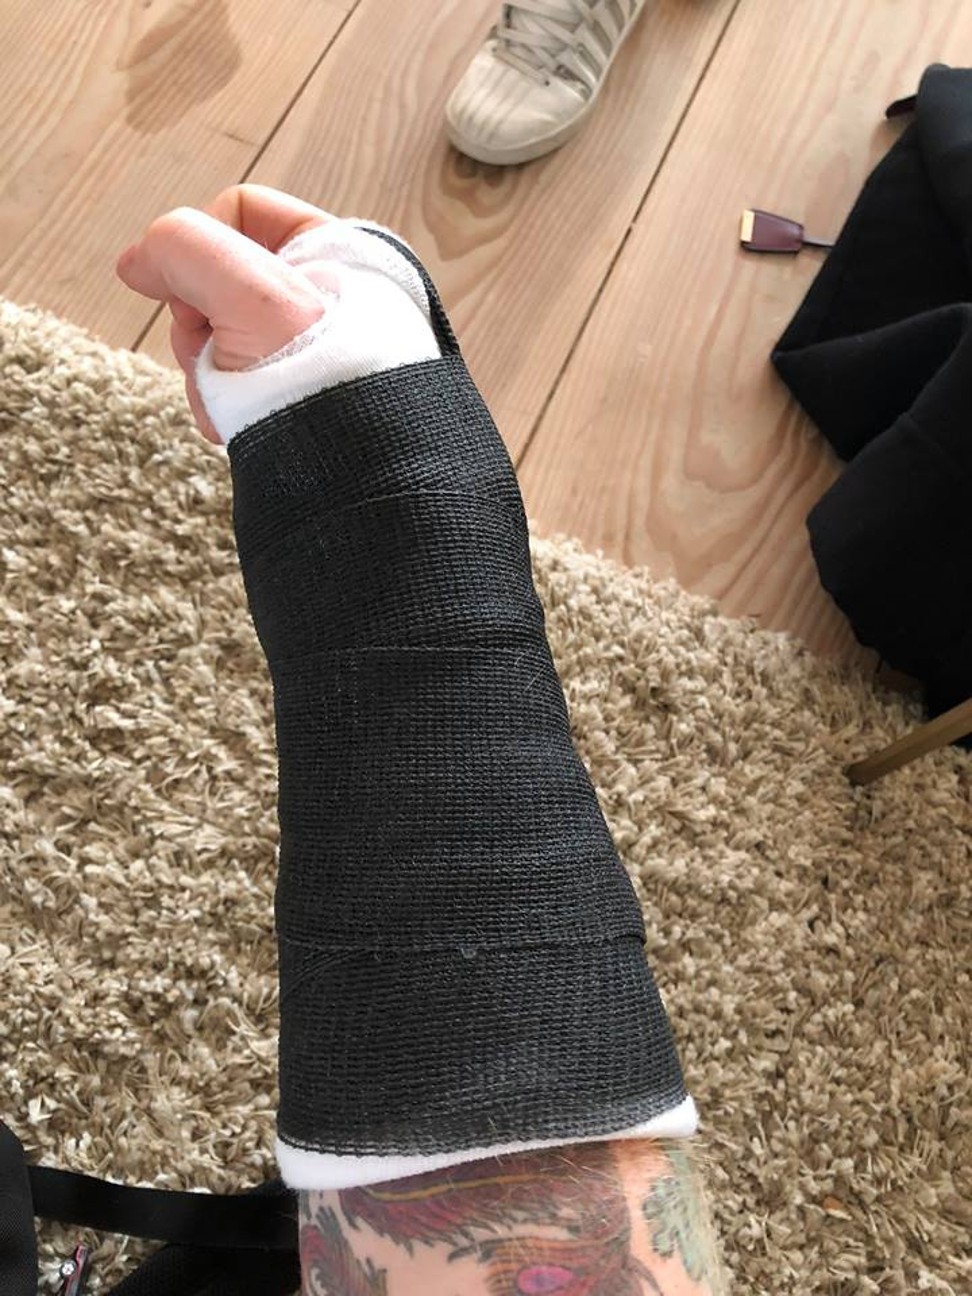 Ed Sheeran’s post showing his arm in a cast in October 2017.